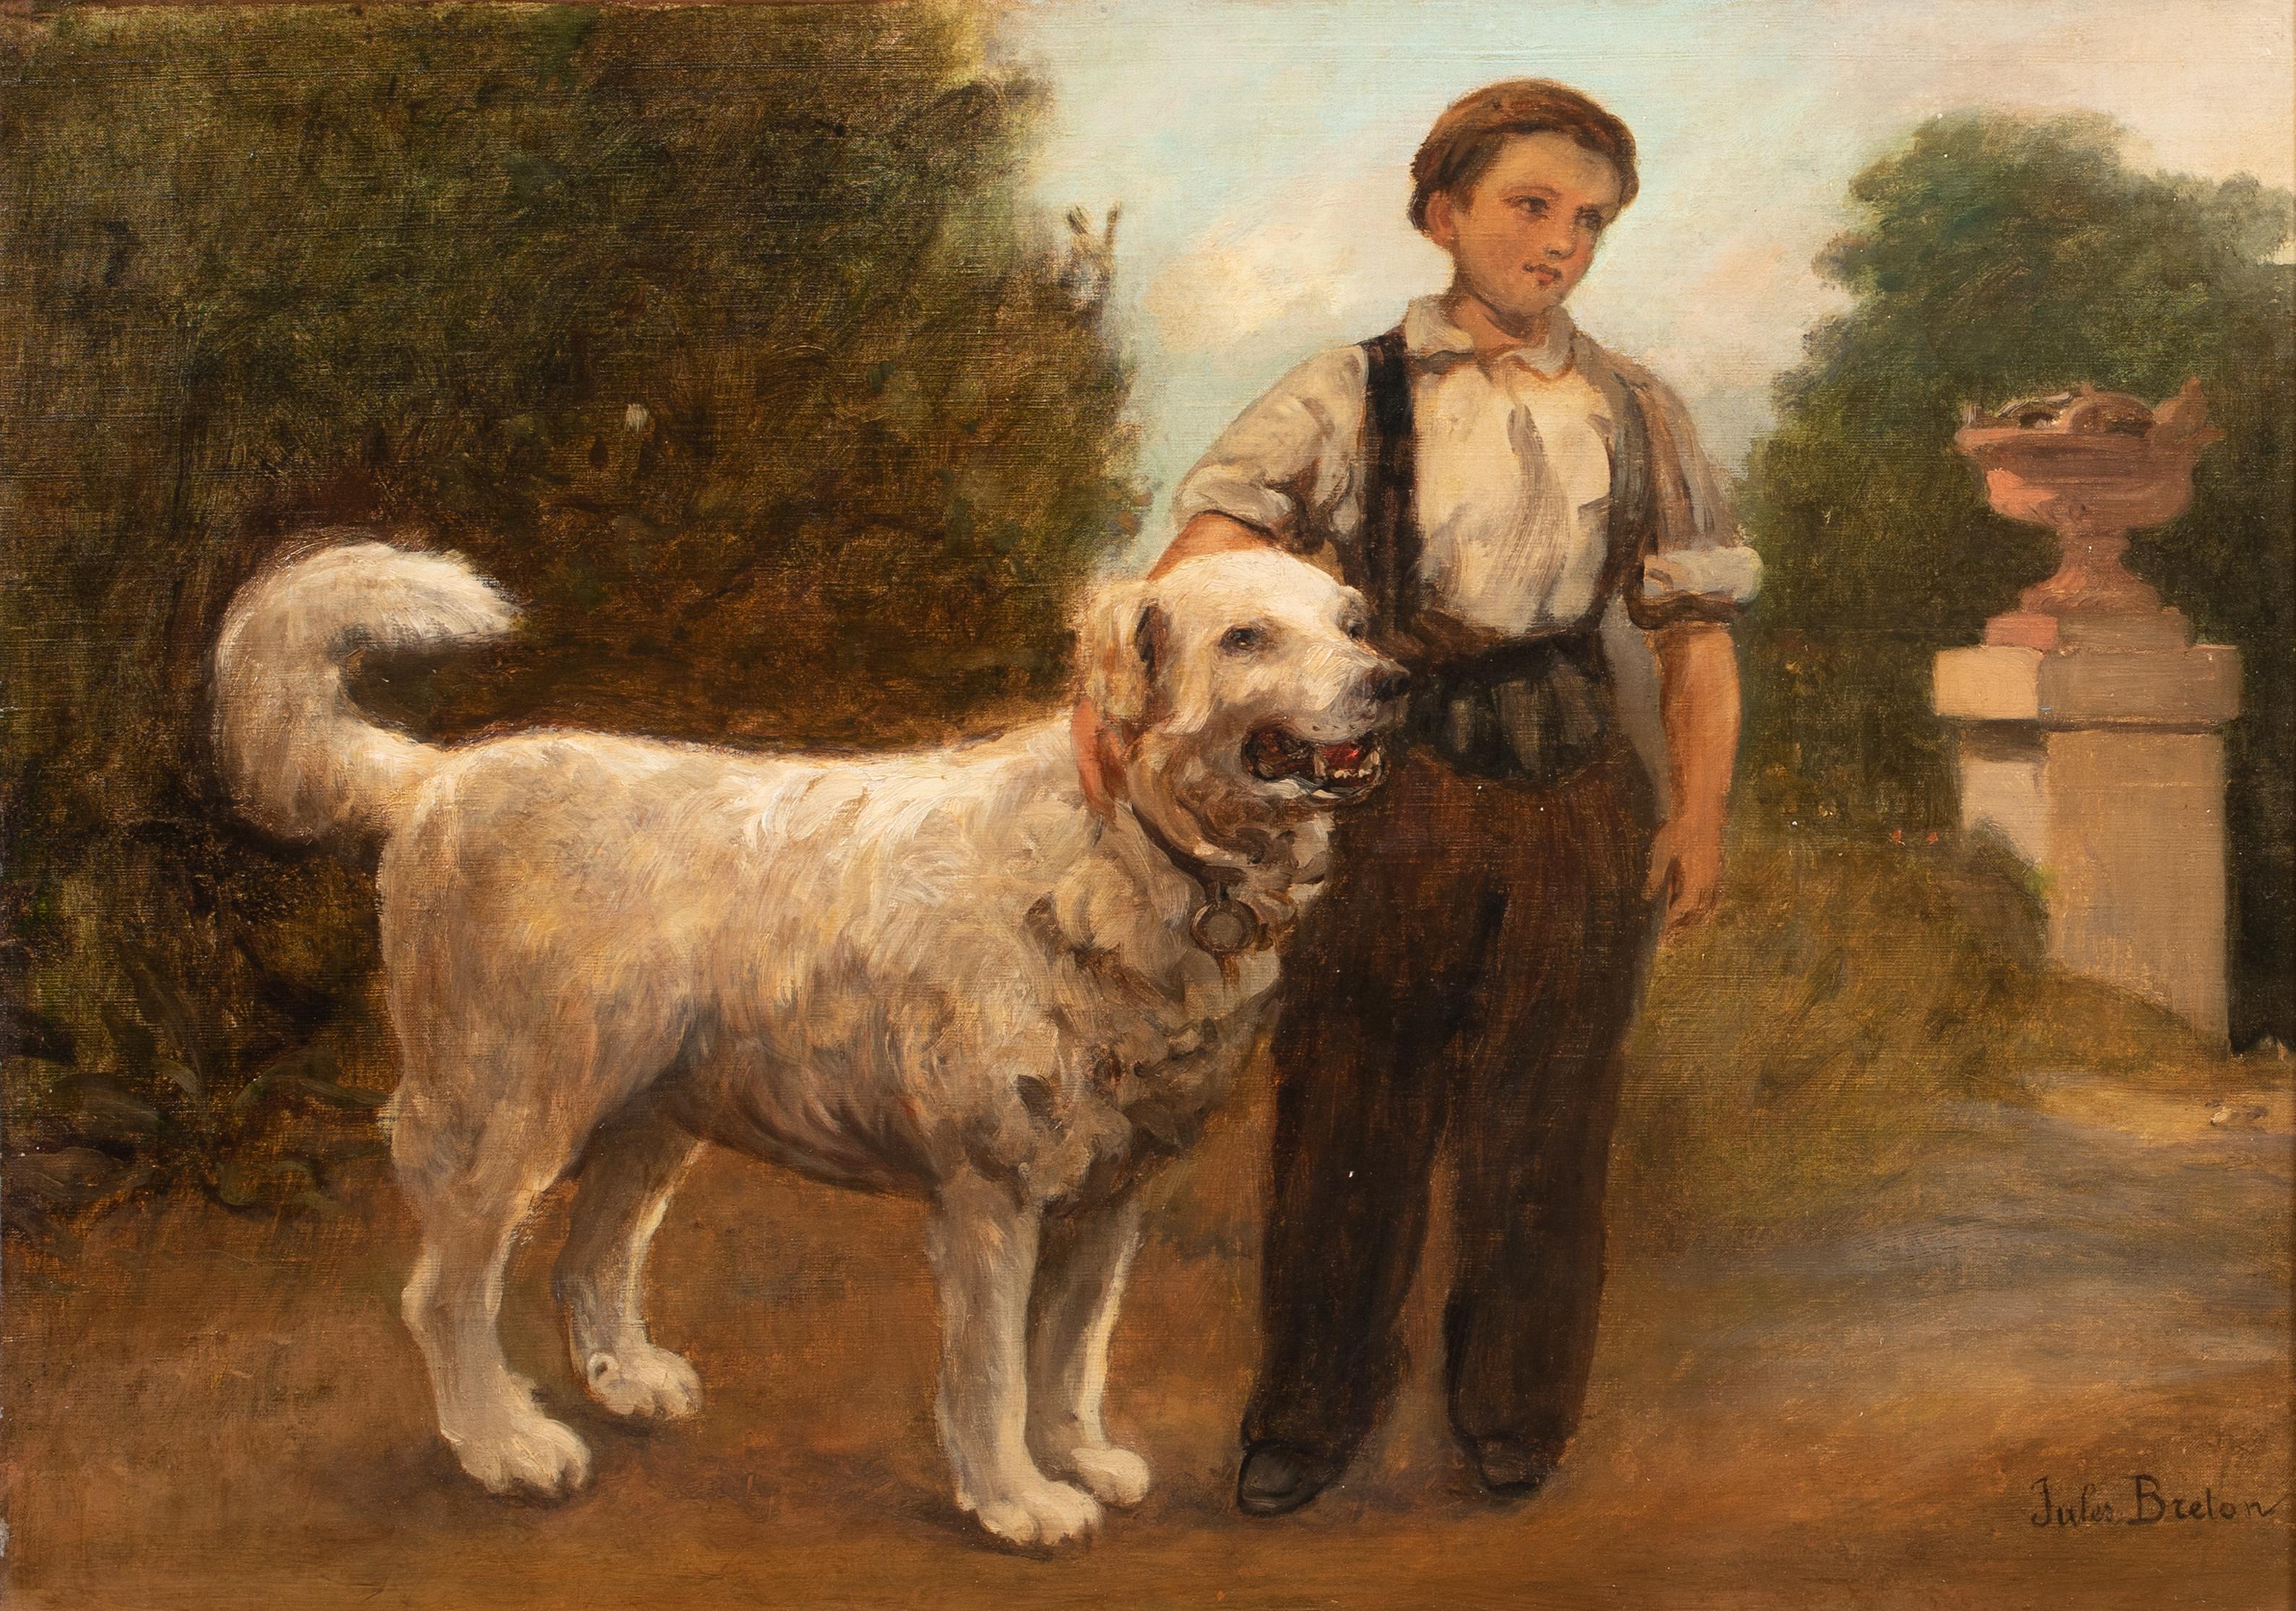 Boy & His Dog, 19th Century

by Jules BRETON (1827-1906) sales to $1,500,000

Large 19th Century French country portrait of a Boy and his Dog, oil on canvas by Jules Breton. Large 19th century portrait of the boy accompanied by a huge white dog.